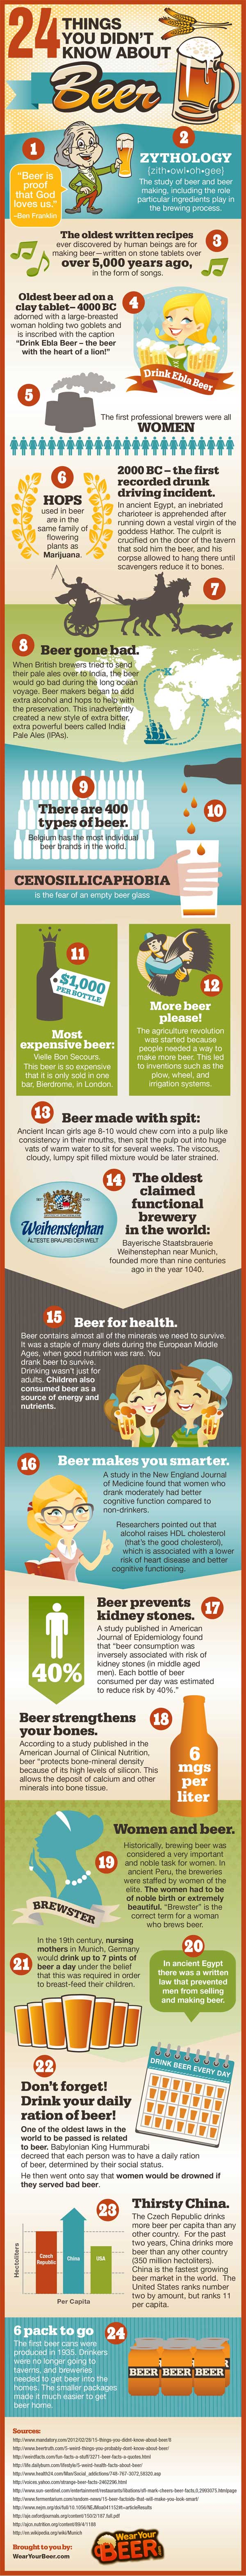 Facts About Beer (infographic)